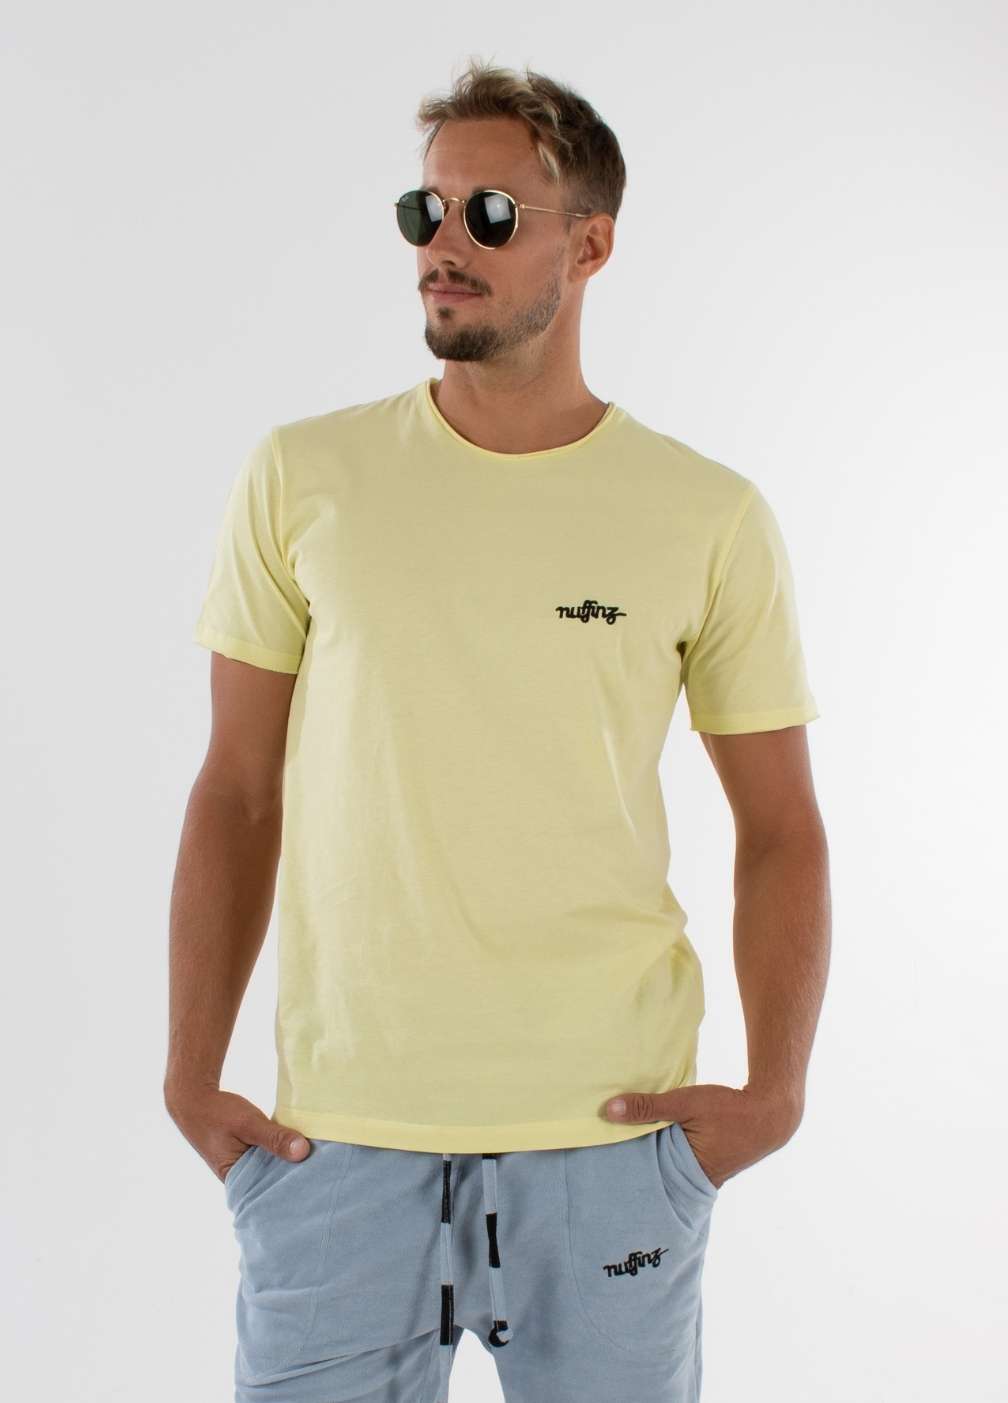 nuffinz LEMON GRASS T-SHIRT PURE - whole outfit visible from the front - sustainable men's t shirts - yellow